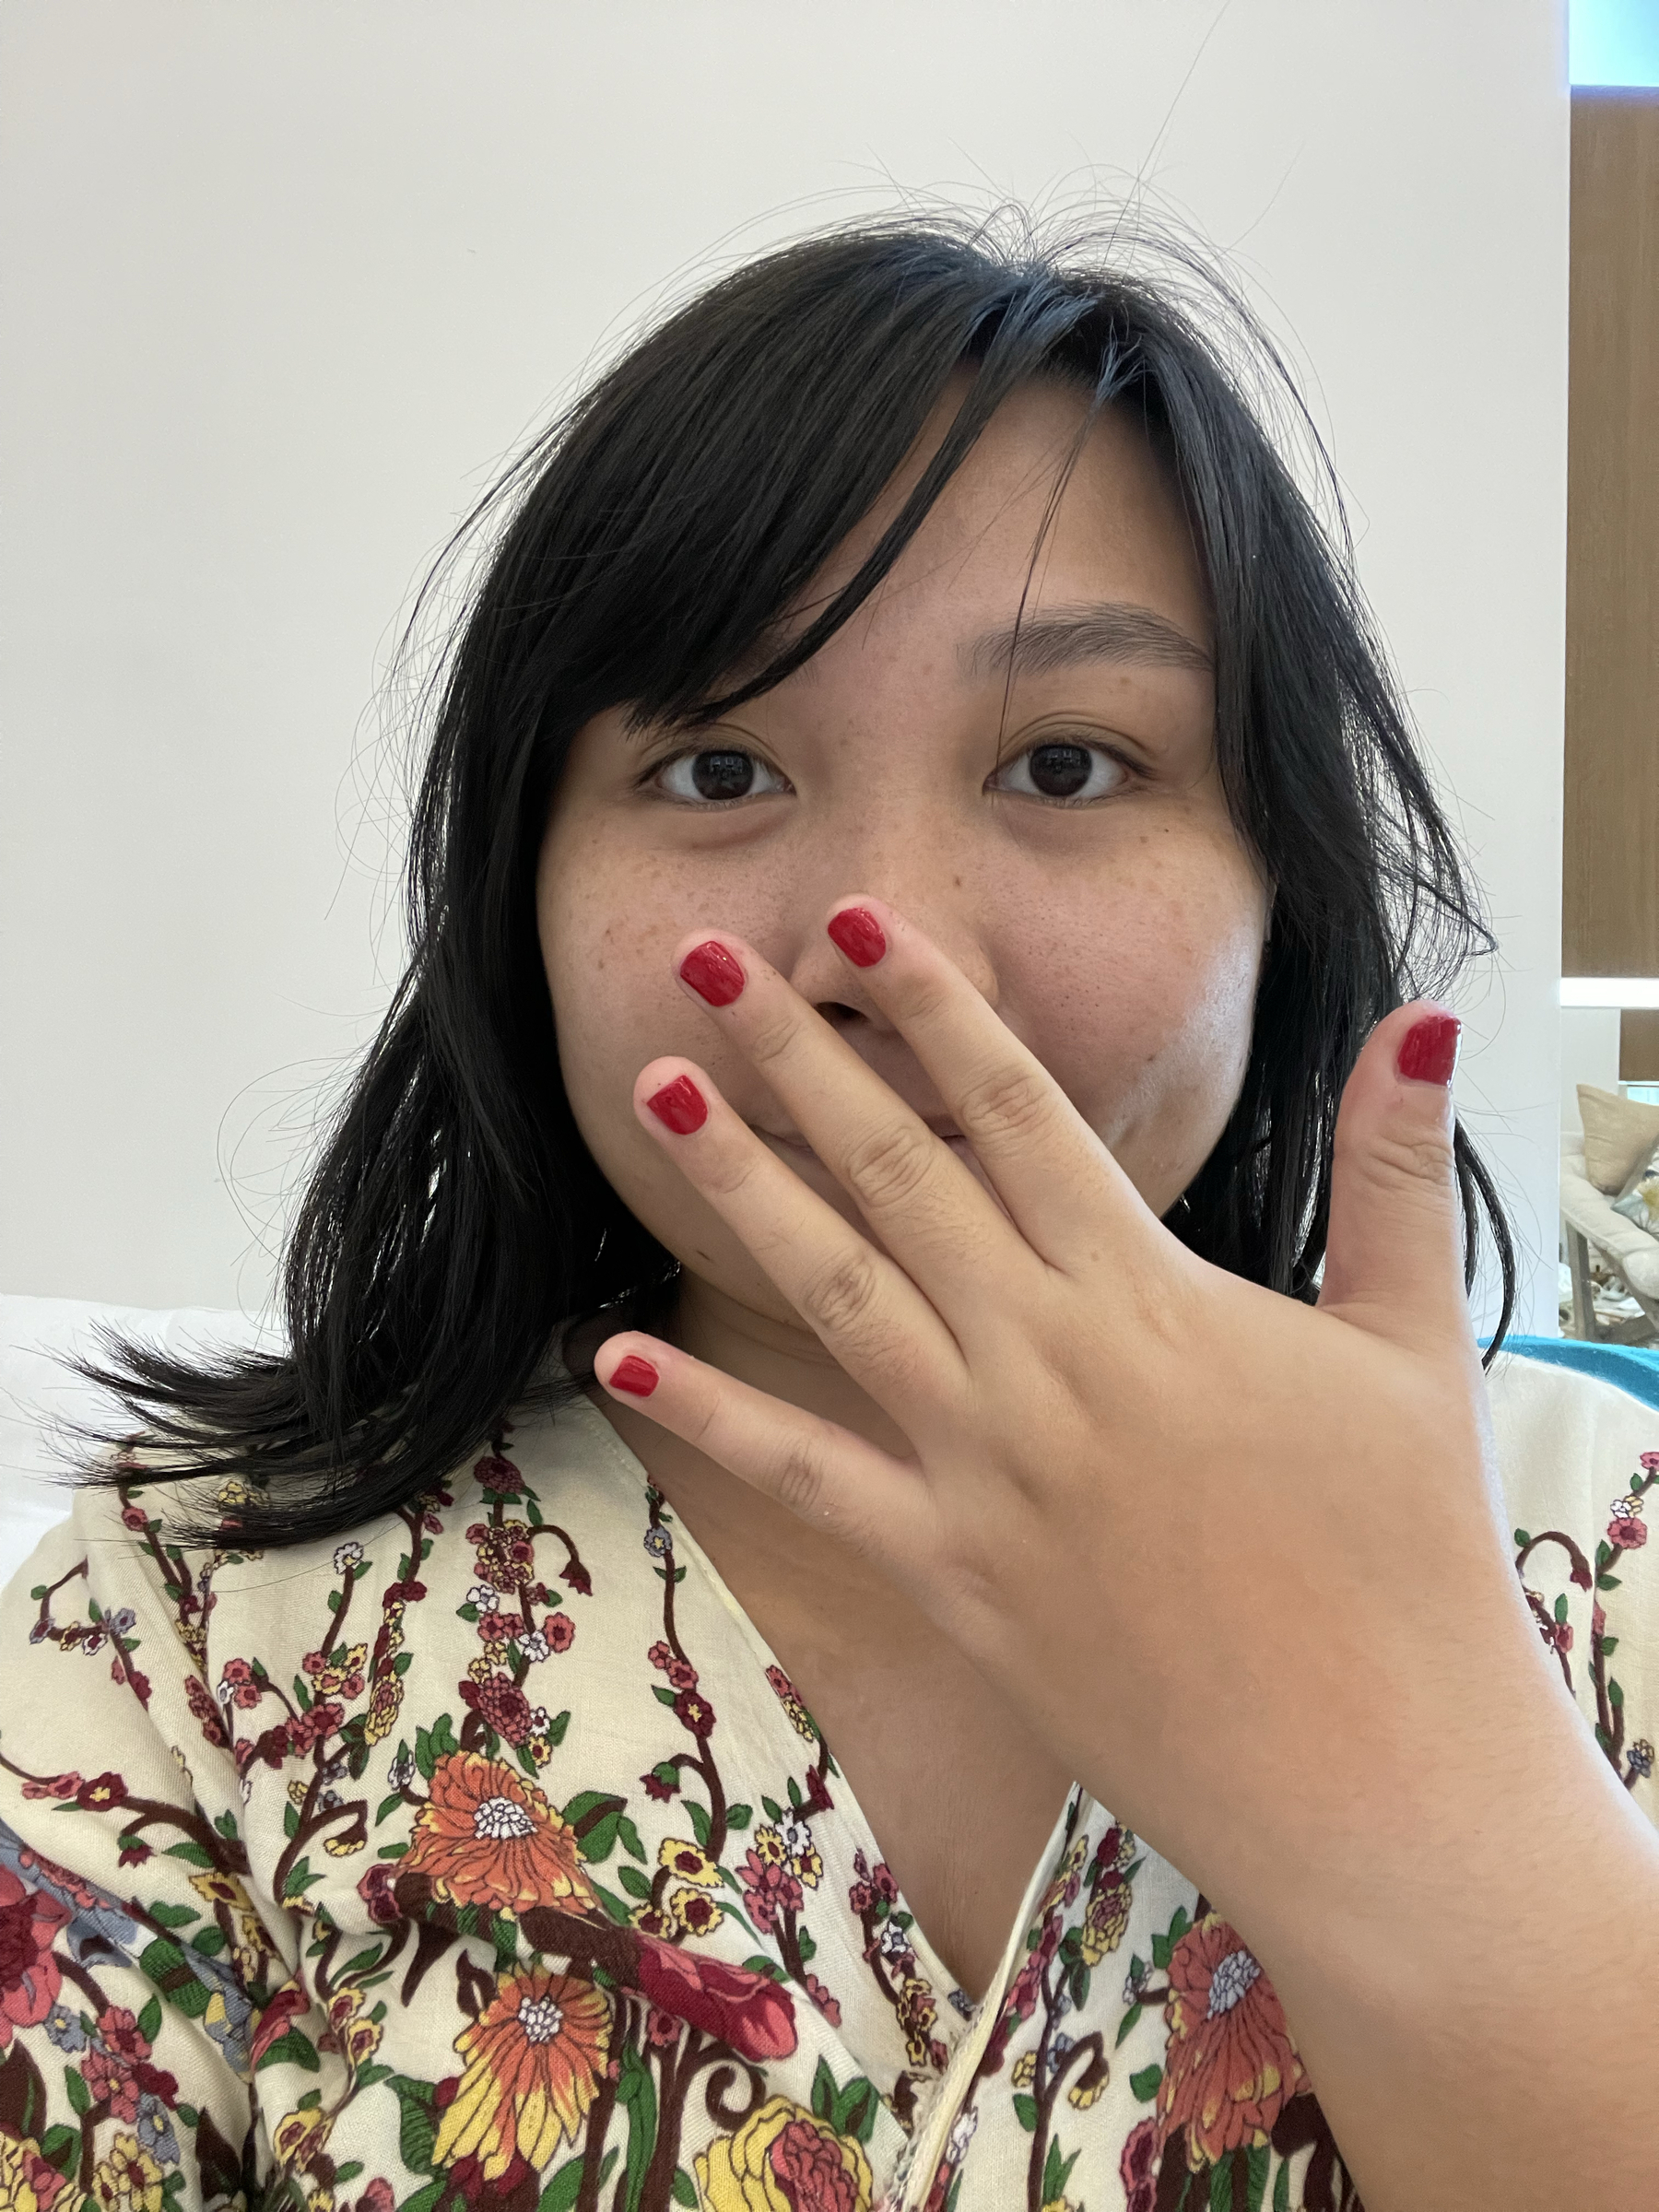 Chi holding her left hand up to cover her mouth, while extending her fingers more to show off her newly polished red nails from her manicure.